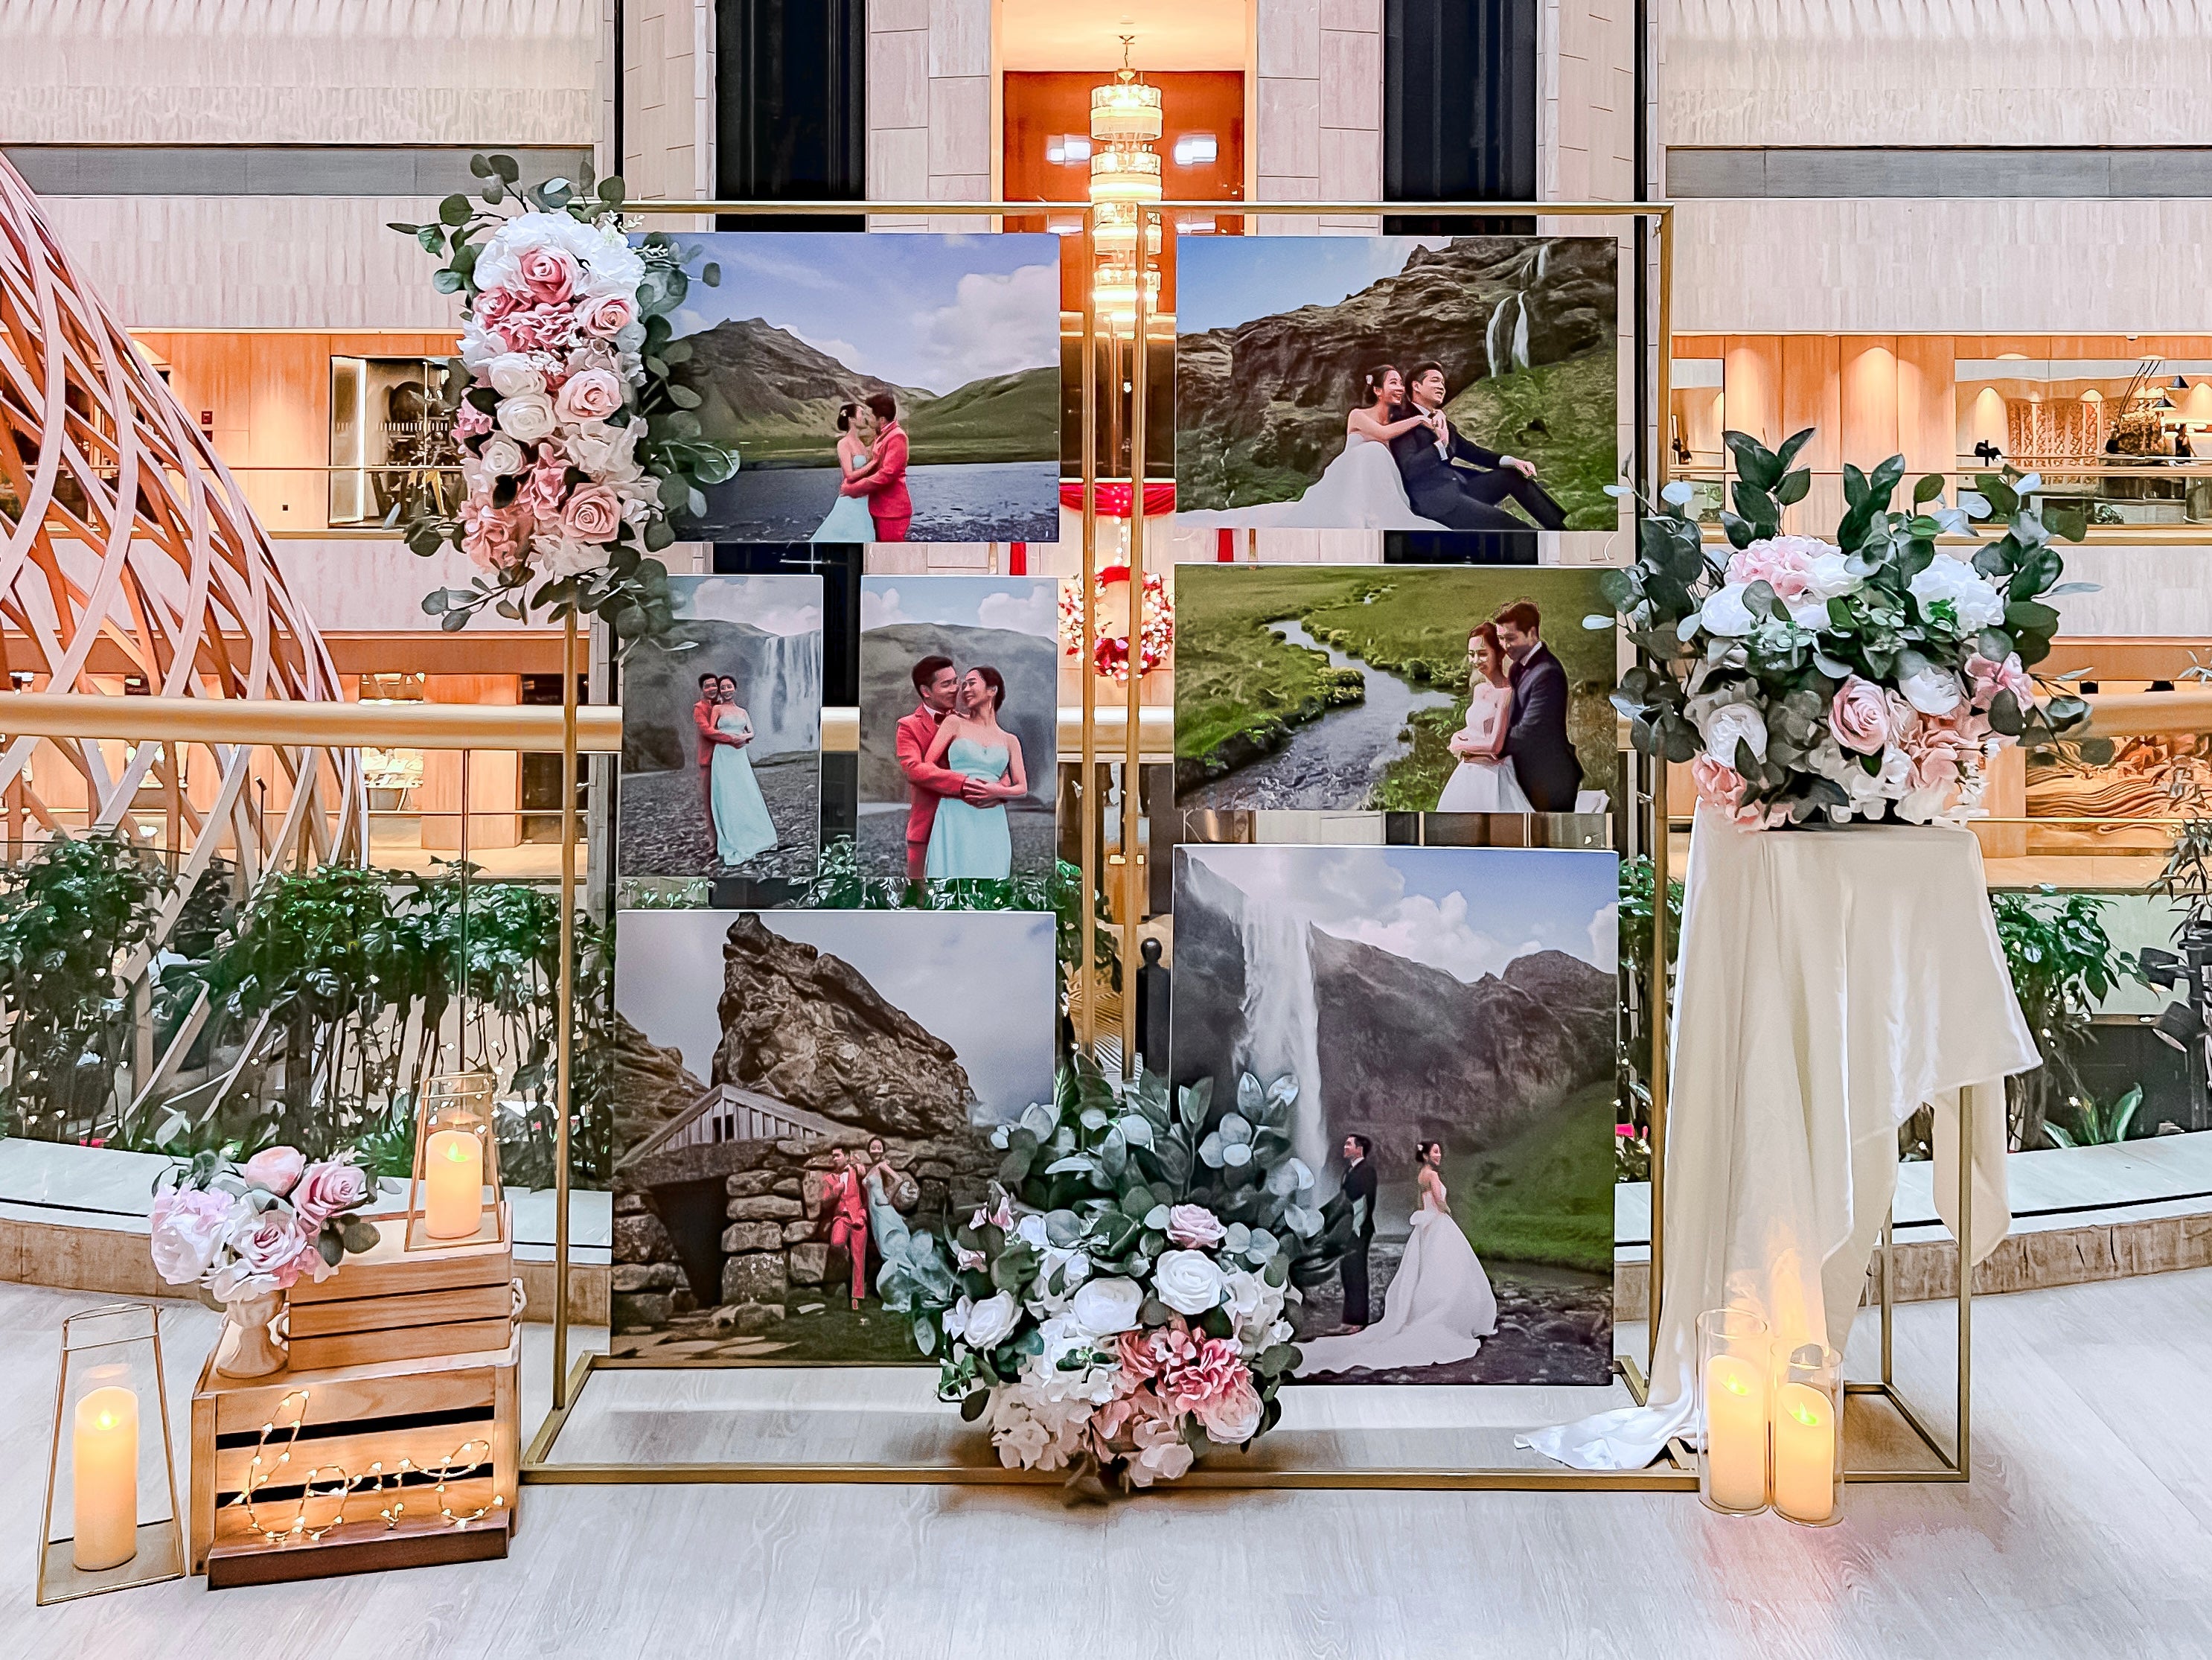 Wedding Reception Decor in Singapore - Multi-stands Photo Gallery with Pink & White Florals (Venue: Parkroyal Collection Marina Bay)